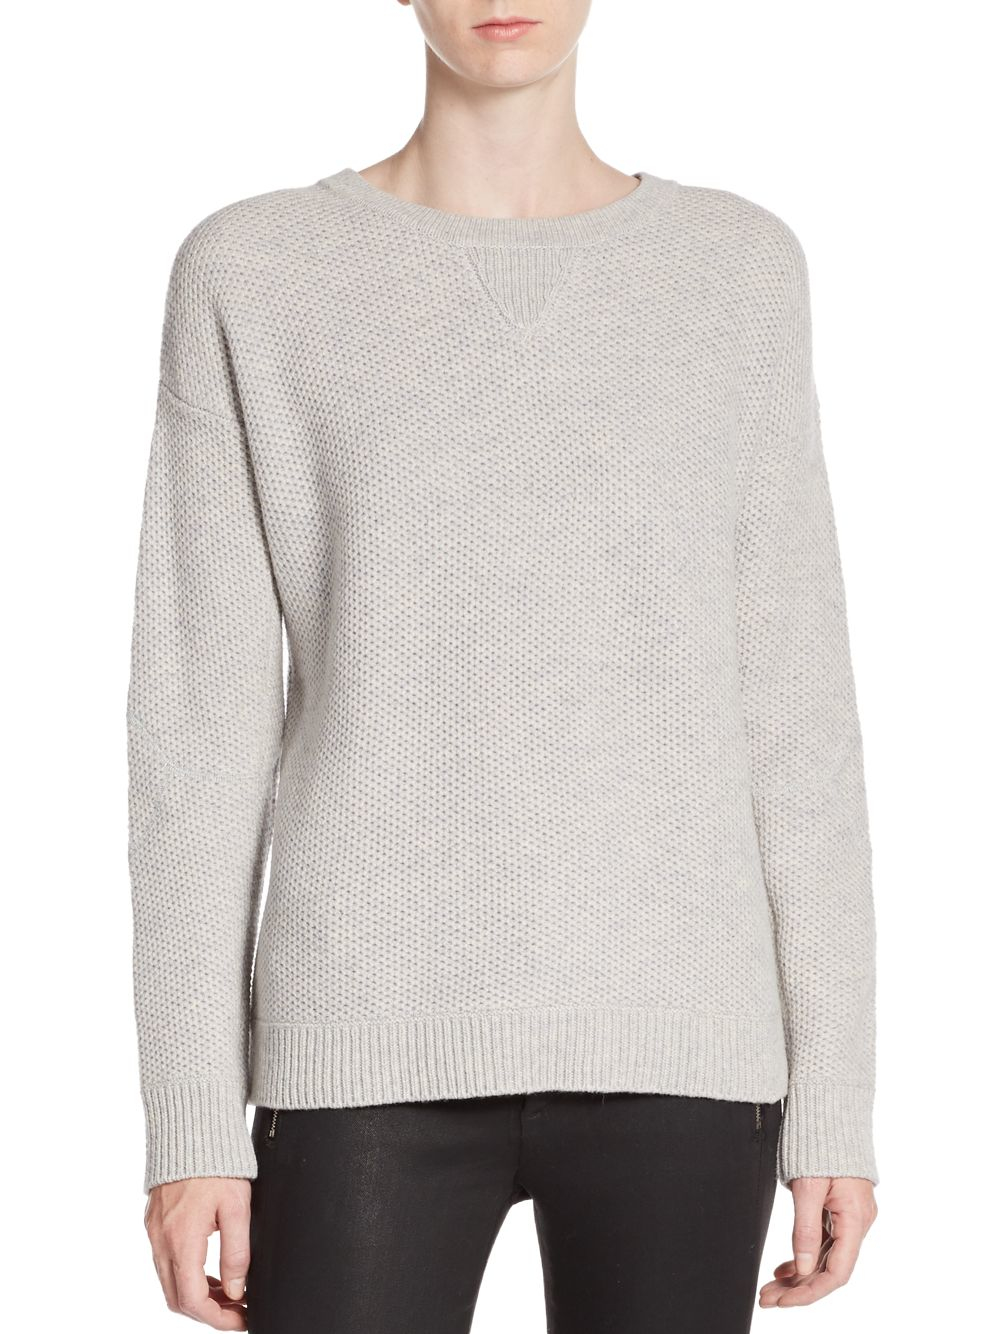 Vince Wool & Yak Honeycomb Sweater in Gray | Lyst